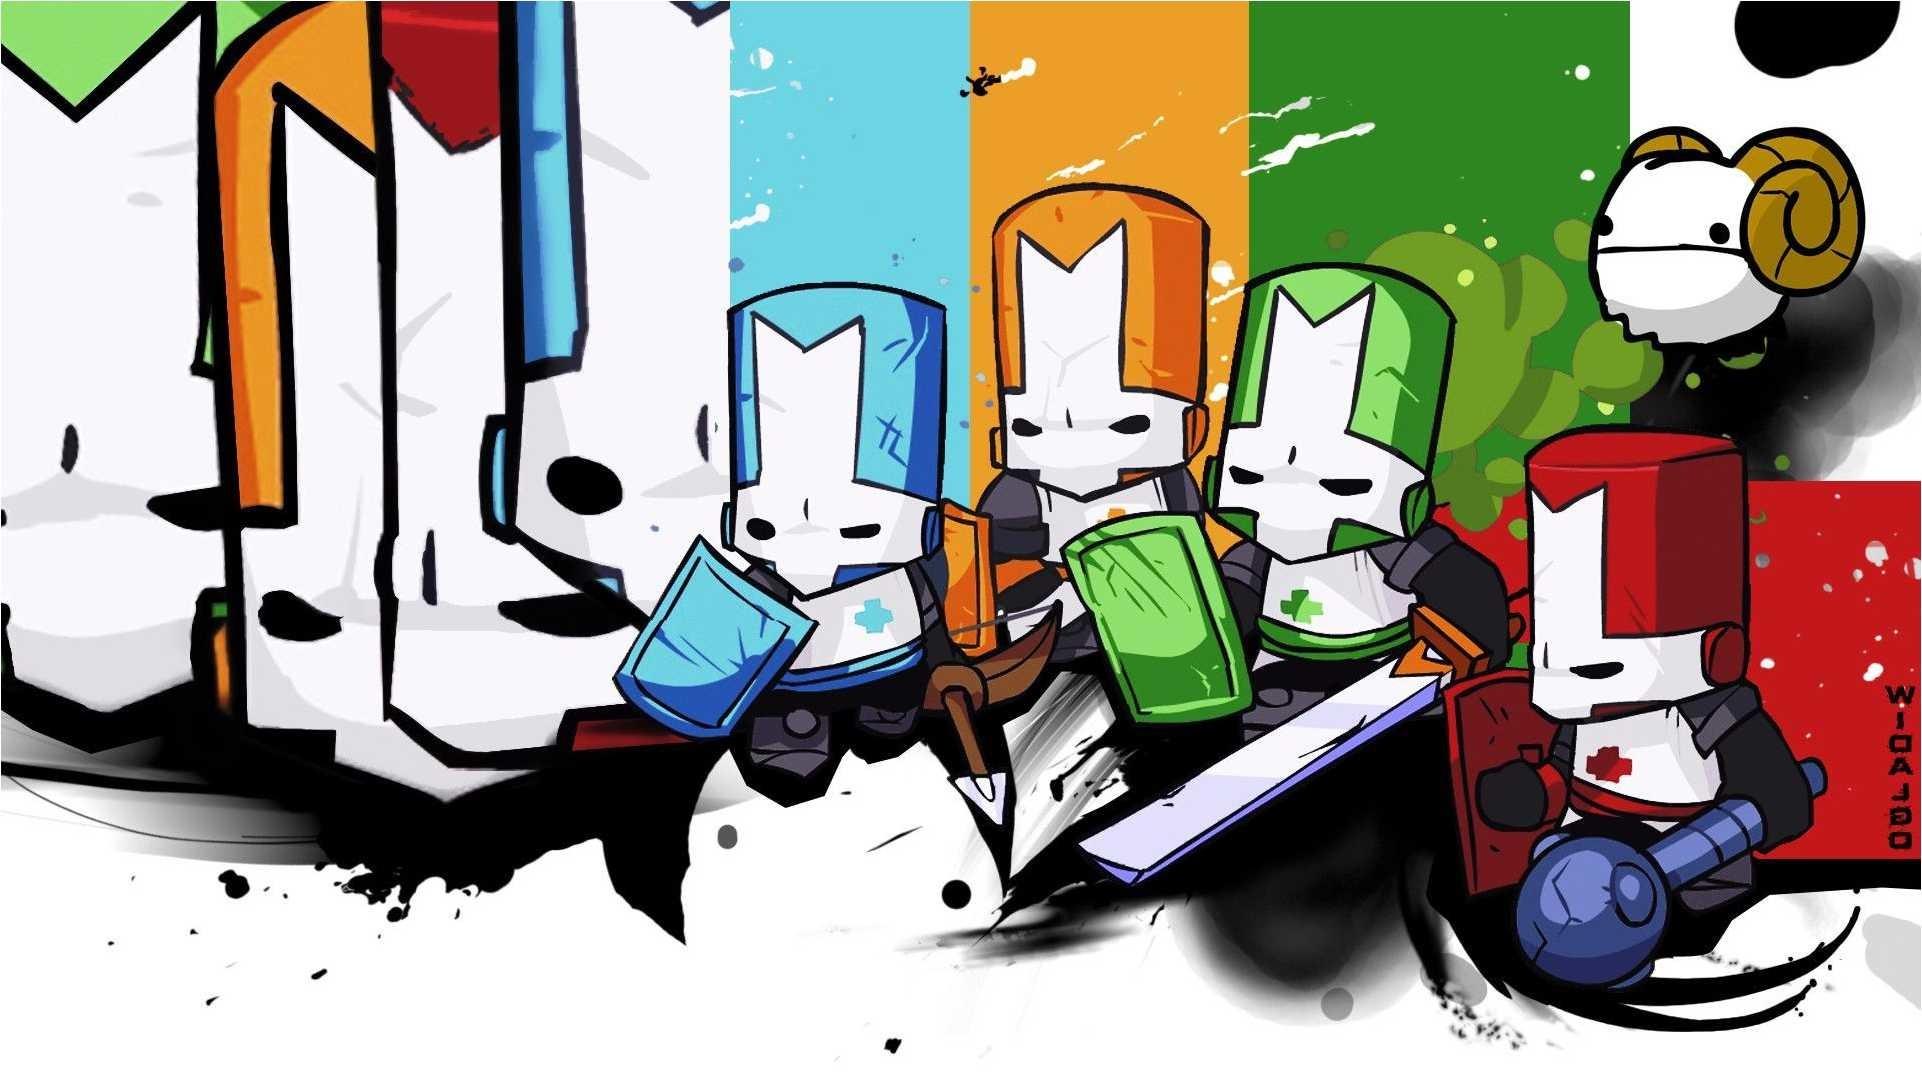 castle crashers remastered wallpapers wallpaper cave castle crashers remastered wallpapers